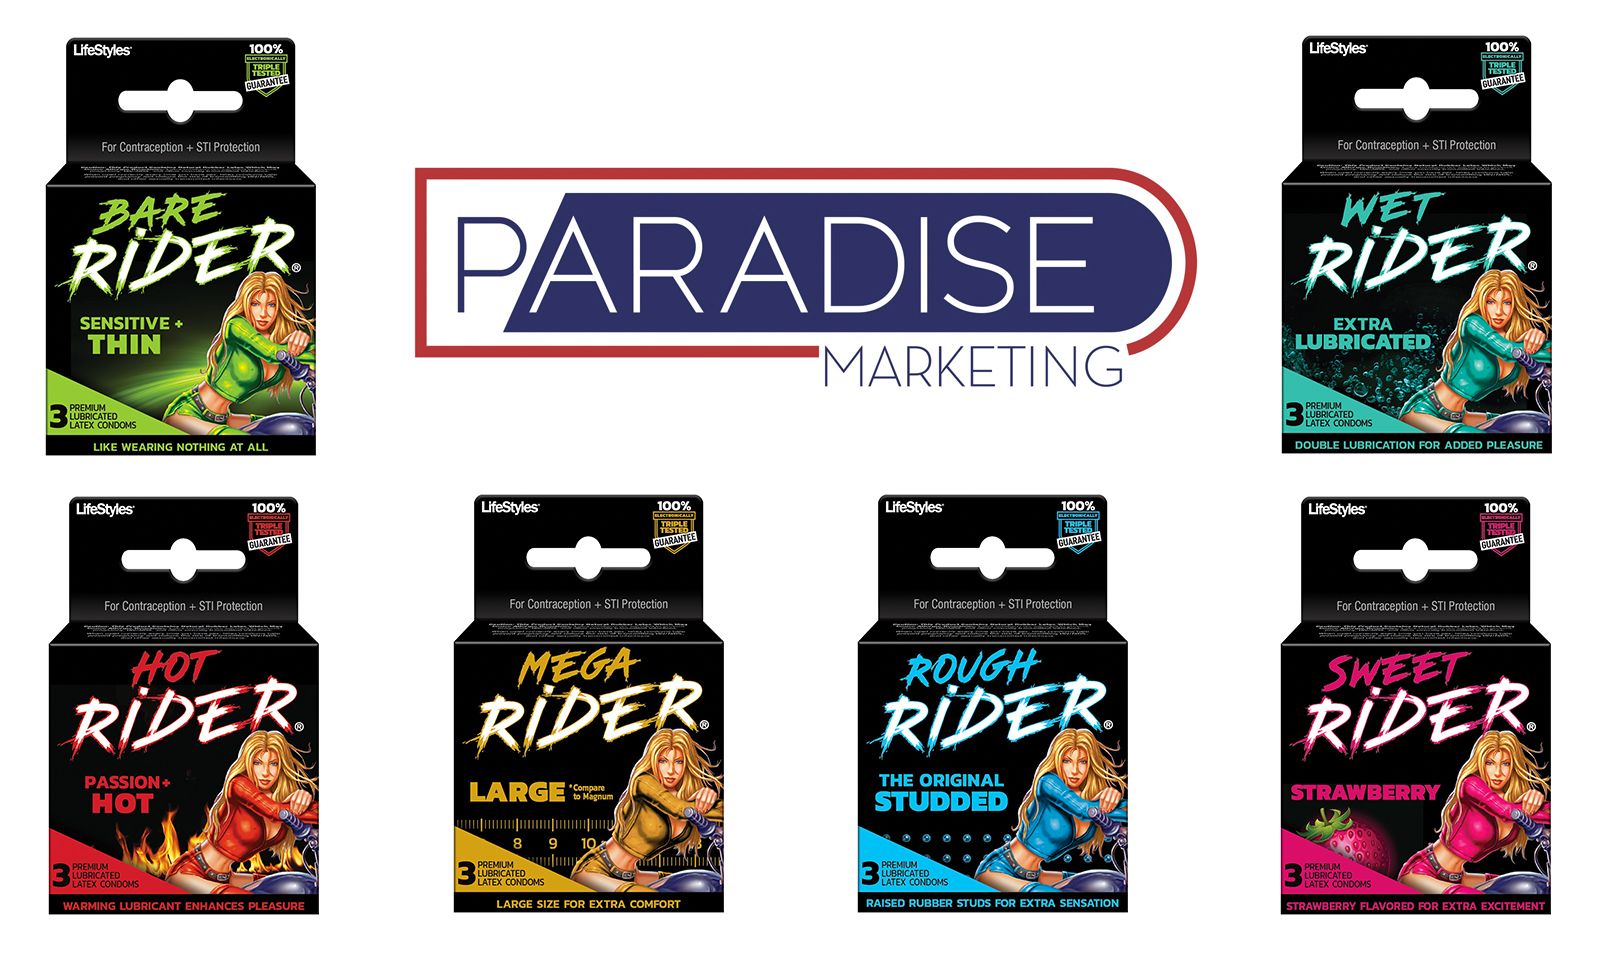 Rider Condoms Now in Stock at Paradise Marketing